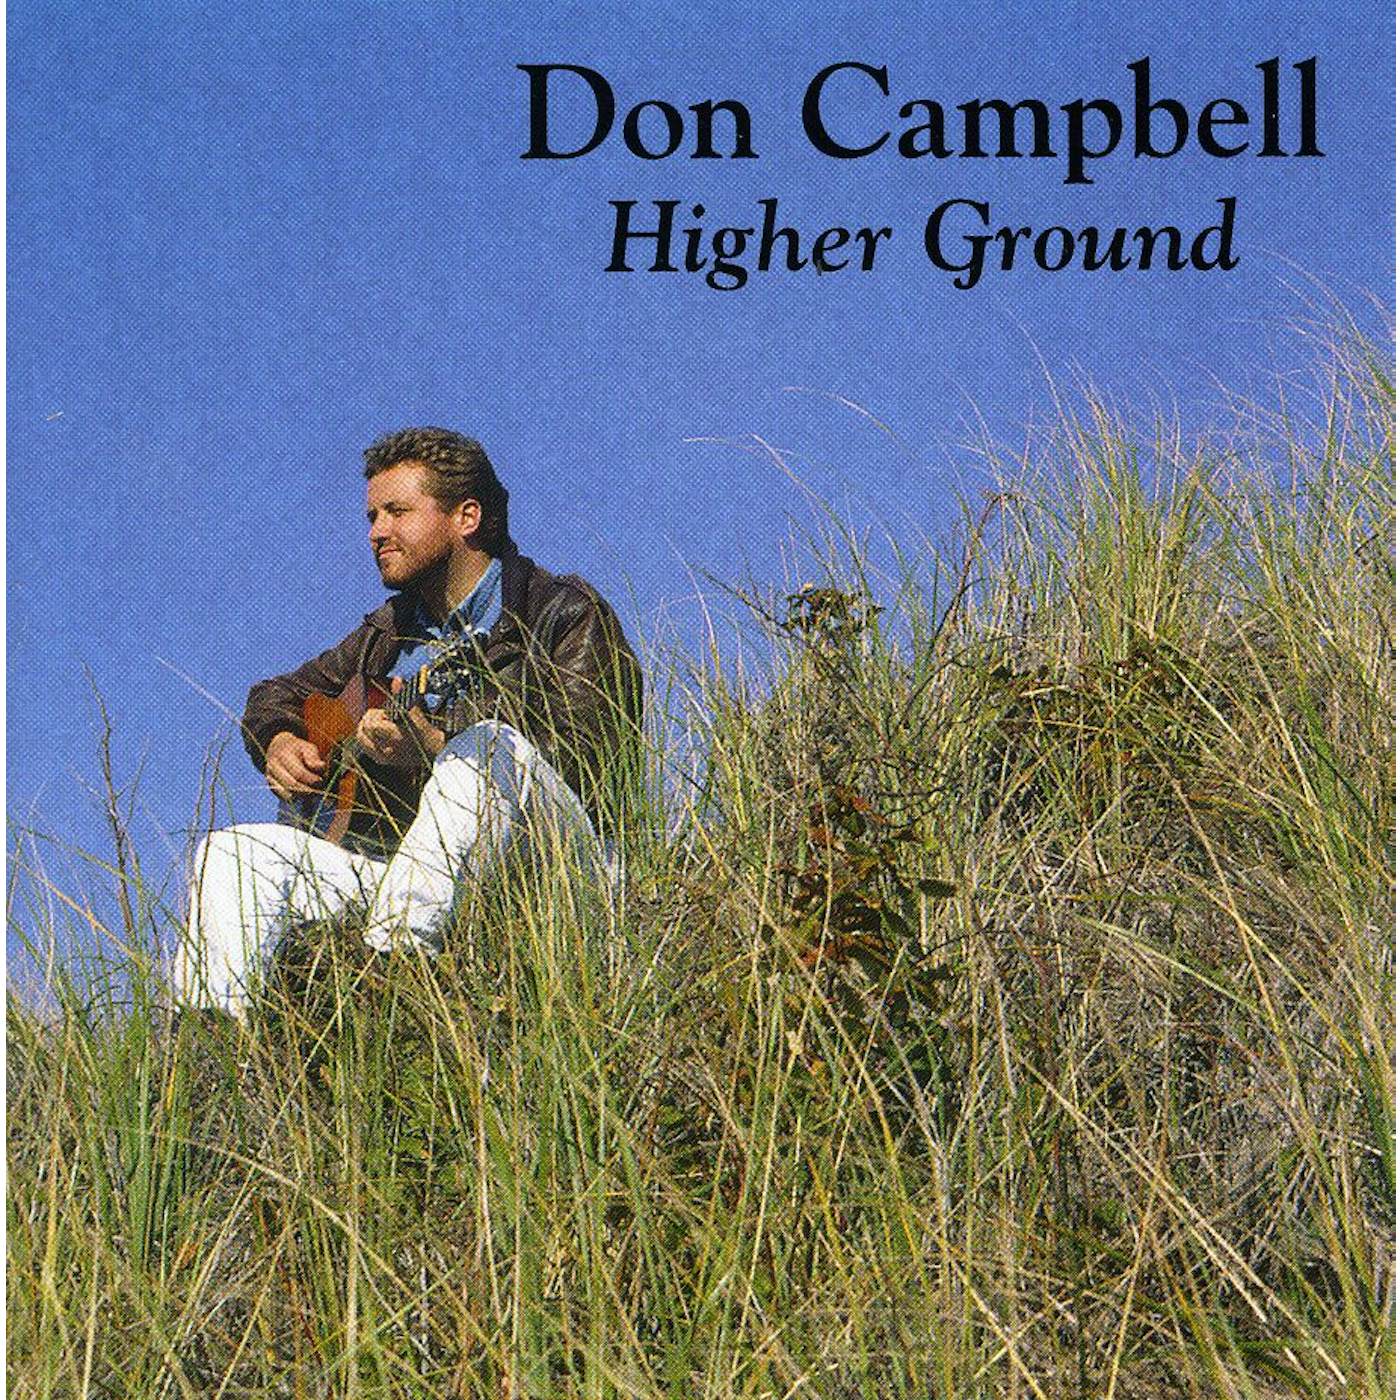 Don Campbell HIGHER GROUND CD